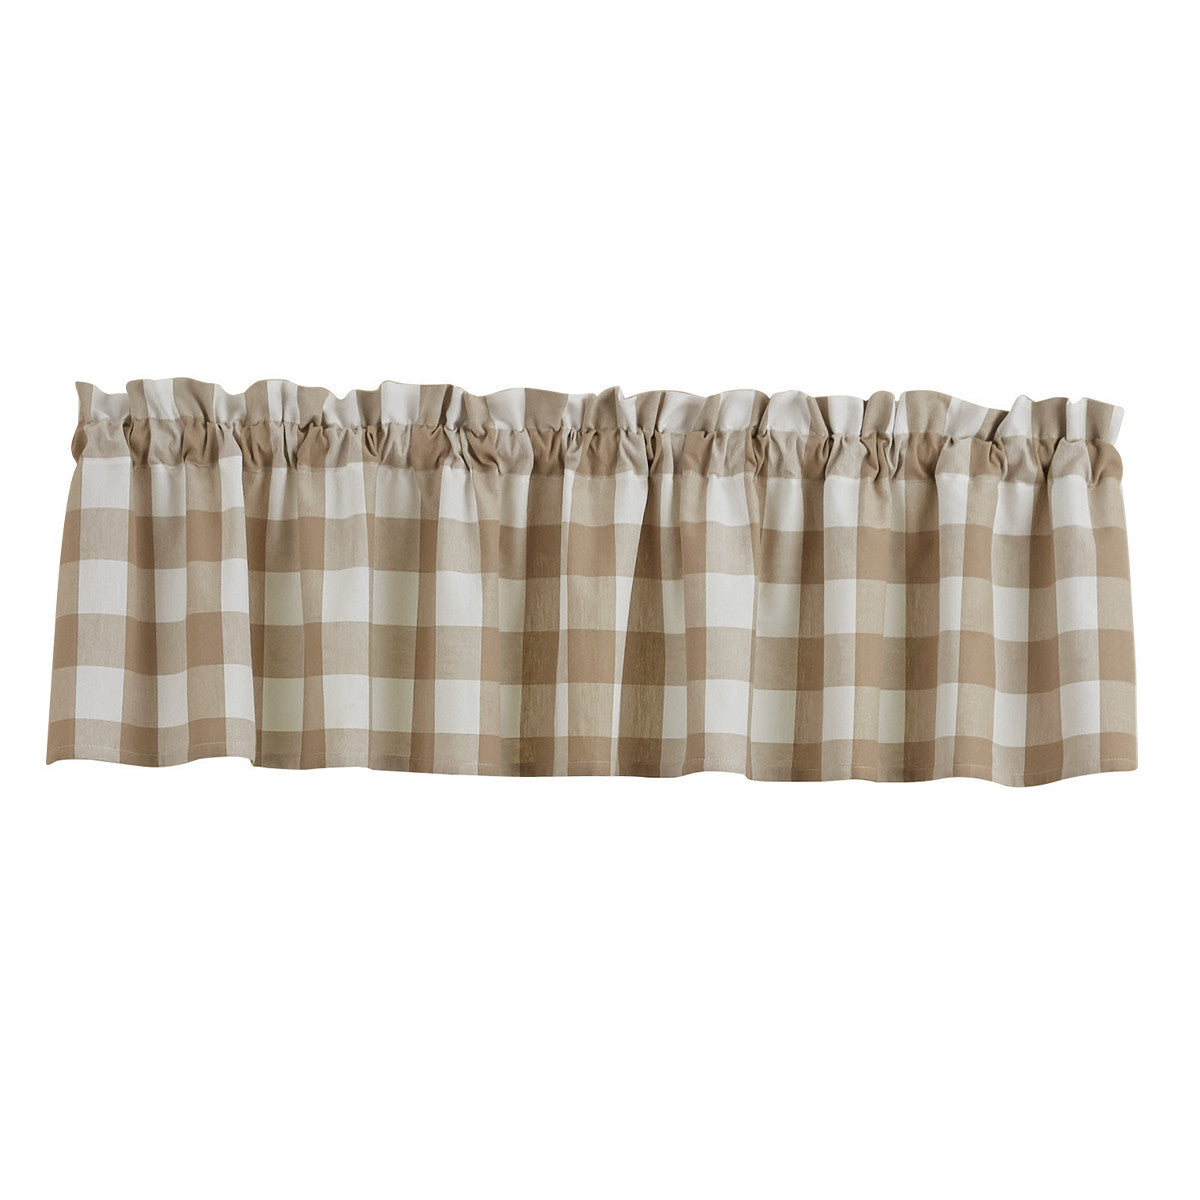 Wicklow natural valance